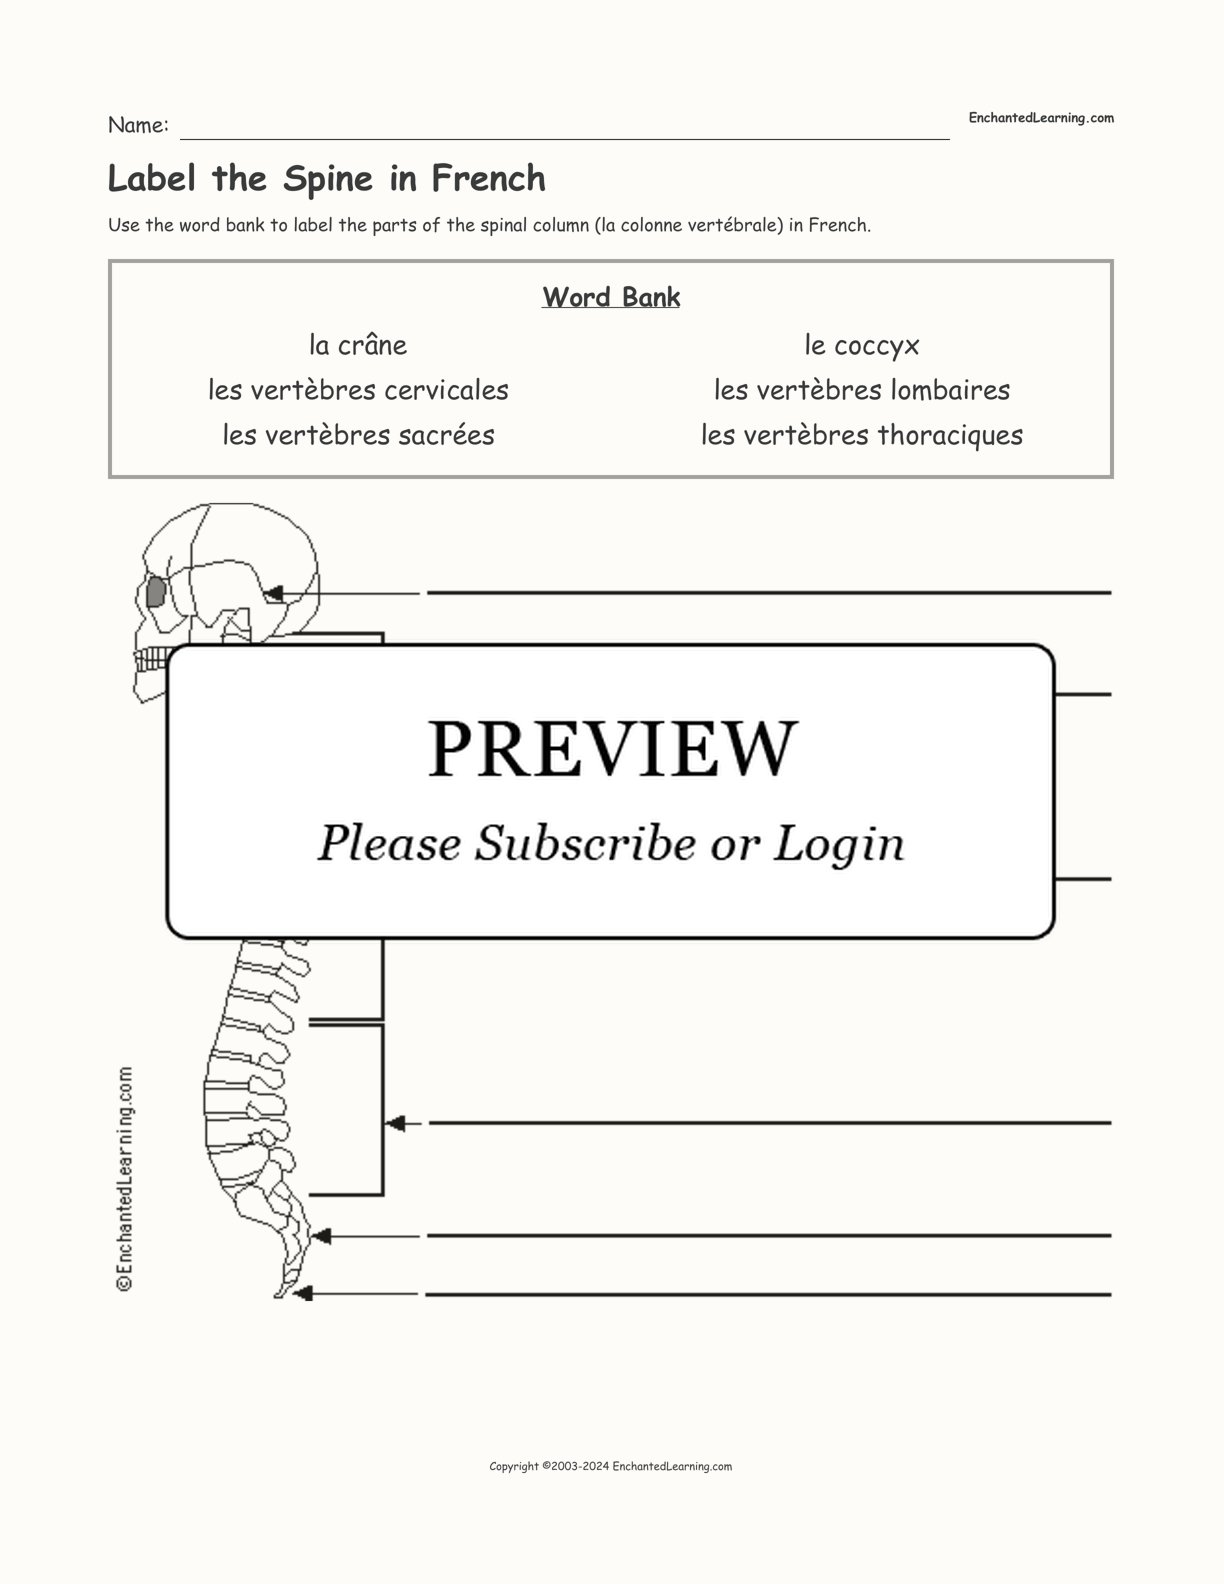 Label the Spine in French interactive worksheet page 1